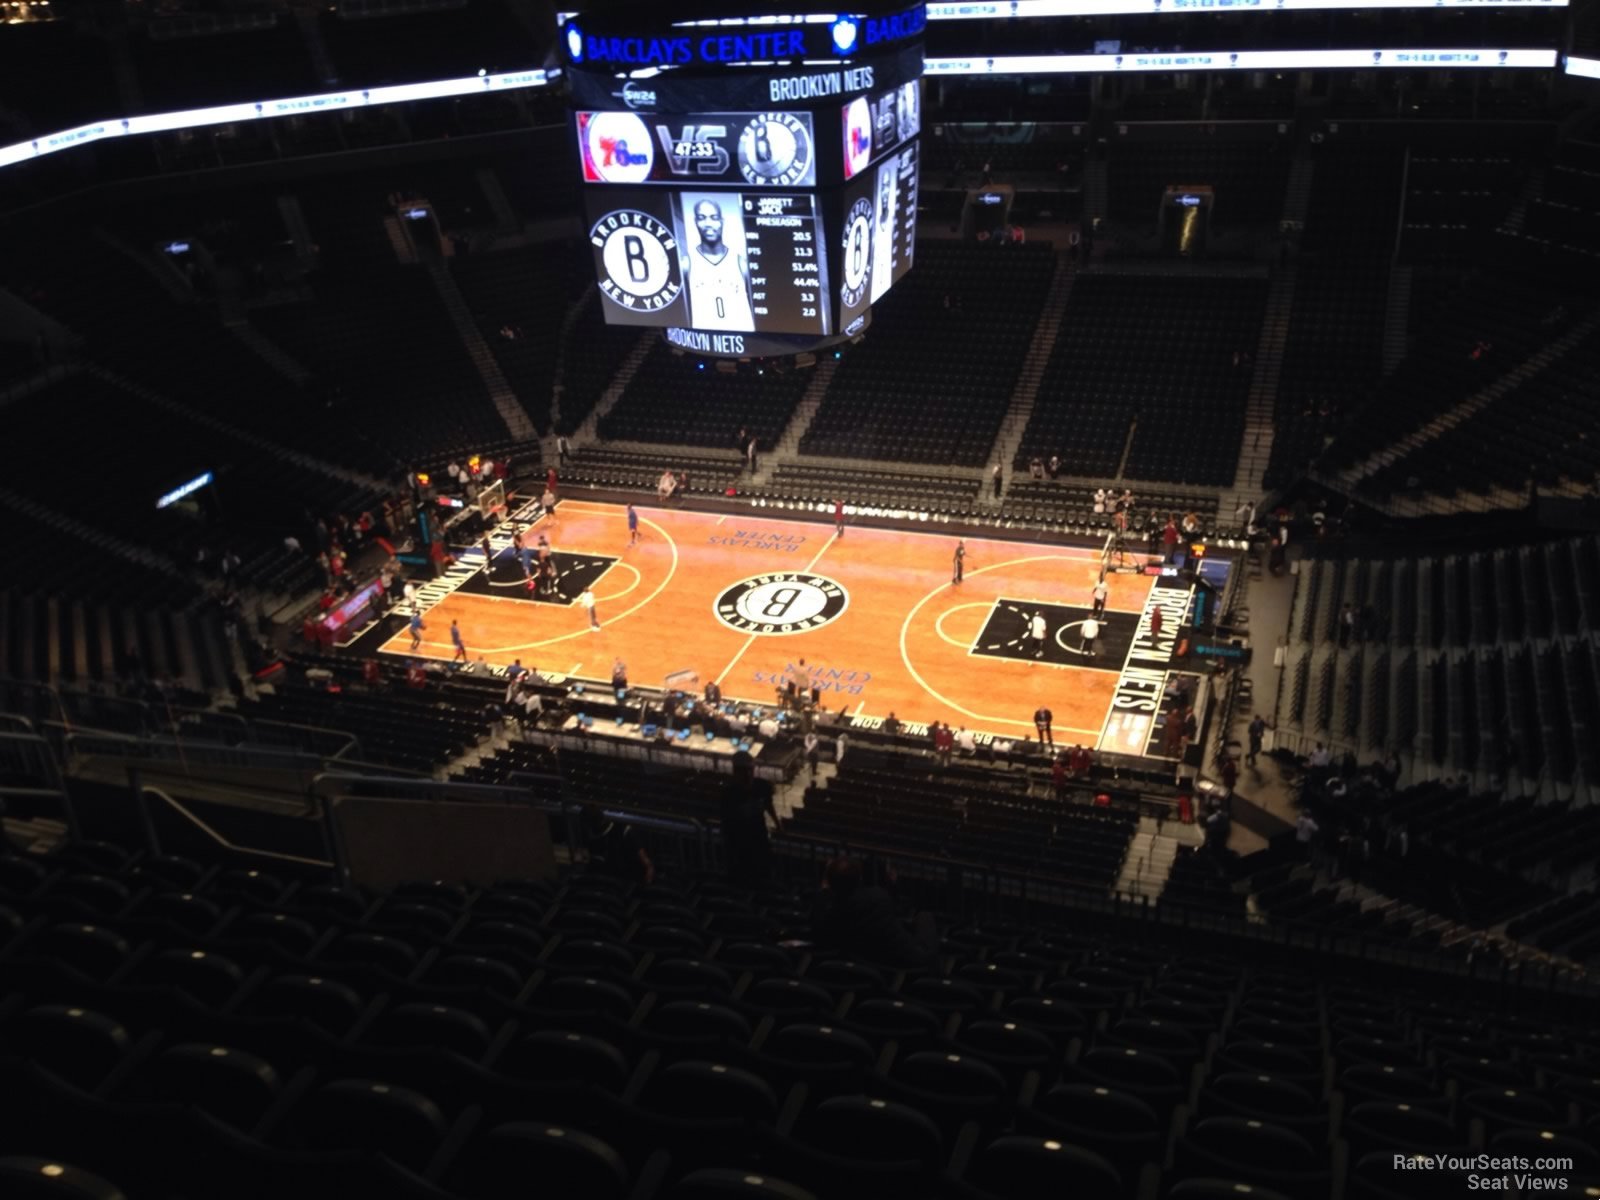 section 206, row 14 seat view  for basketball - barclays center